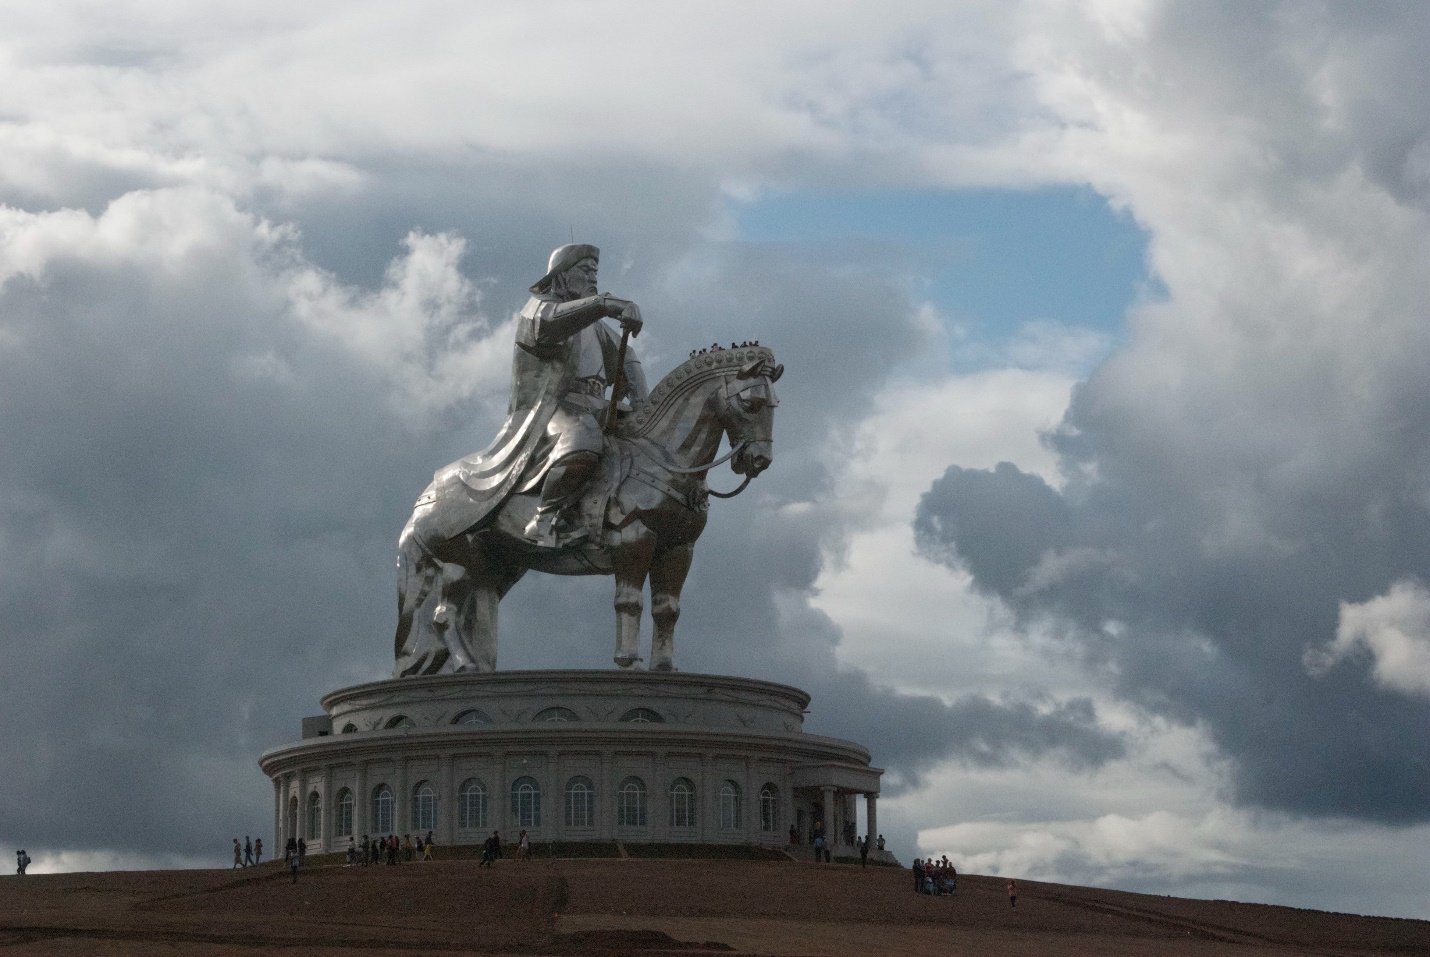 The Great Genghis Khan Statue in Mongolia